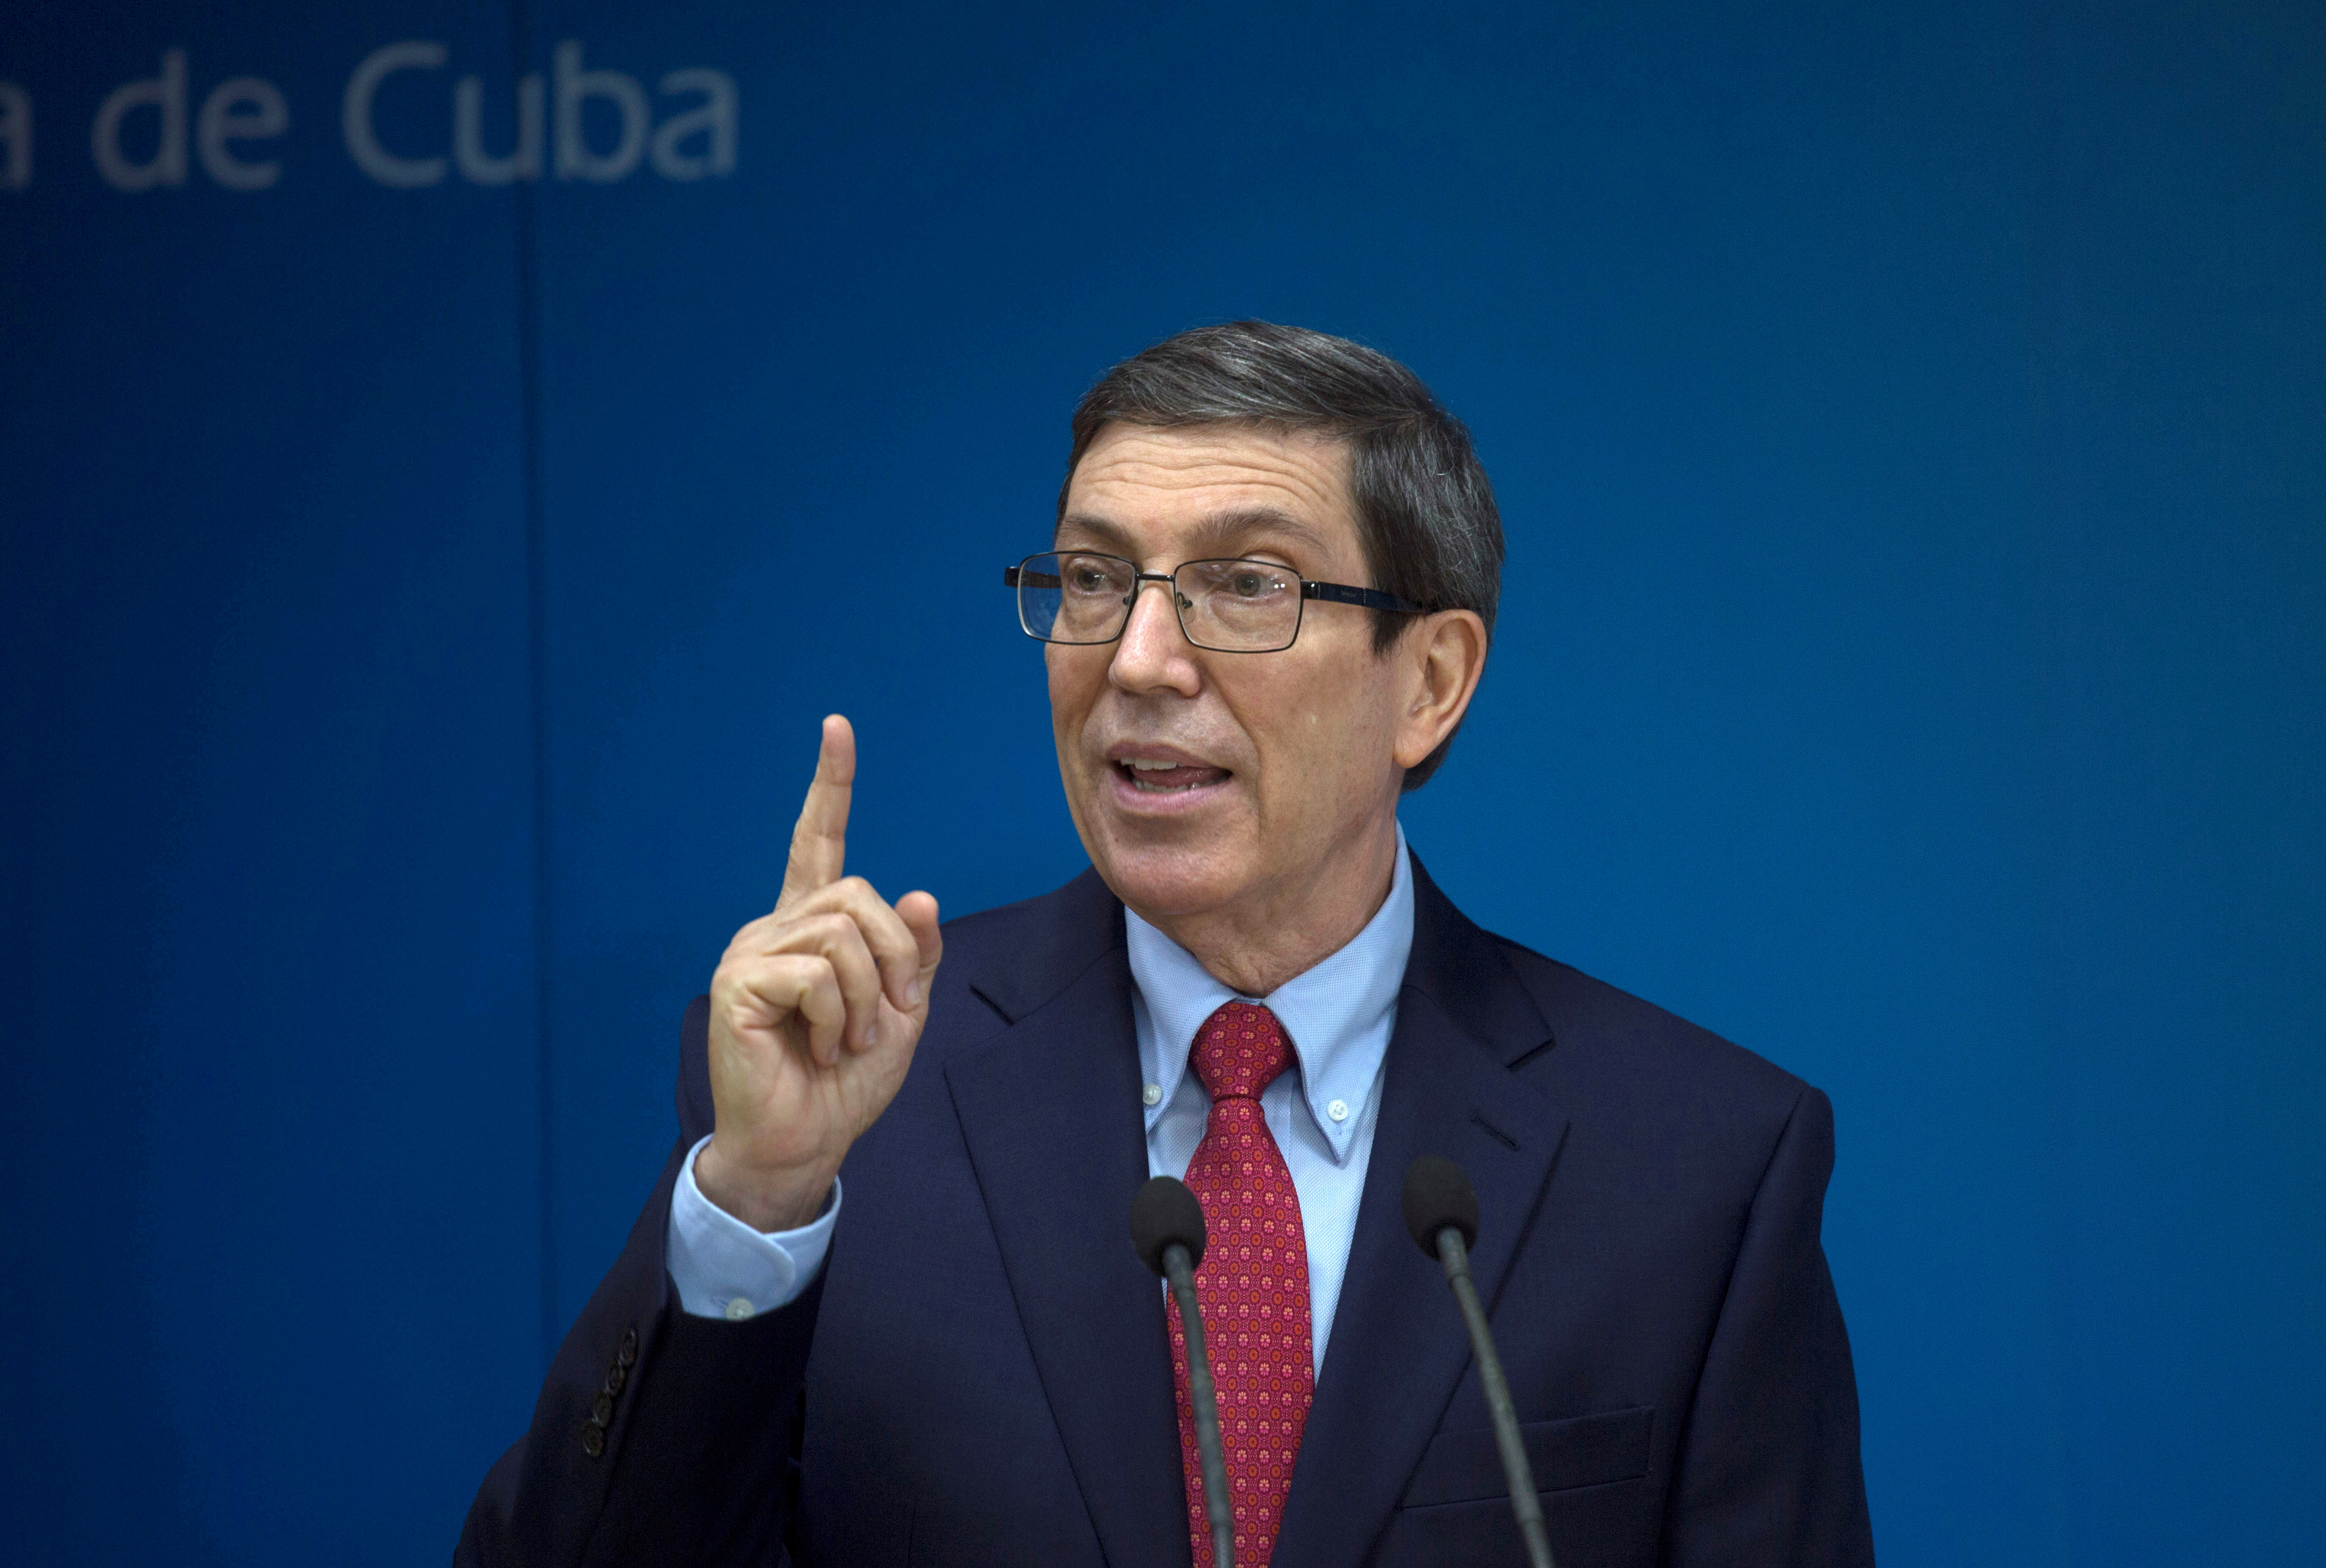 Cuba's Foreign Minister Bruno Rodriguez Parilla speaks during a news conference in Havana